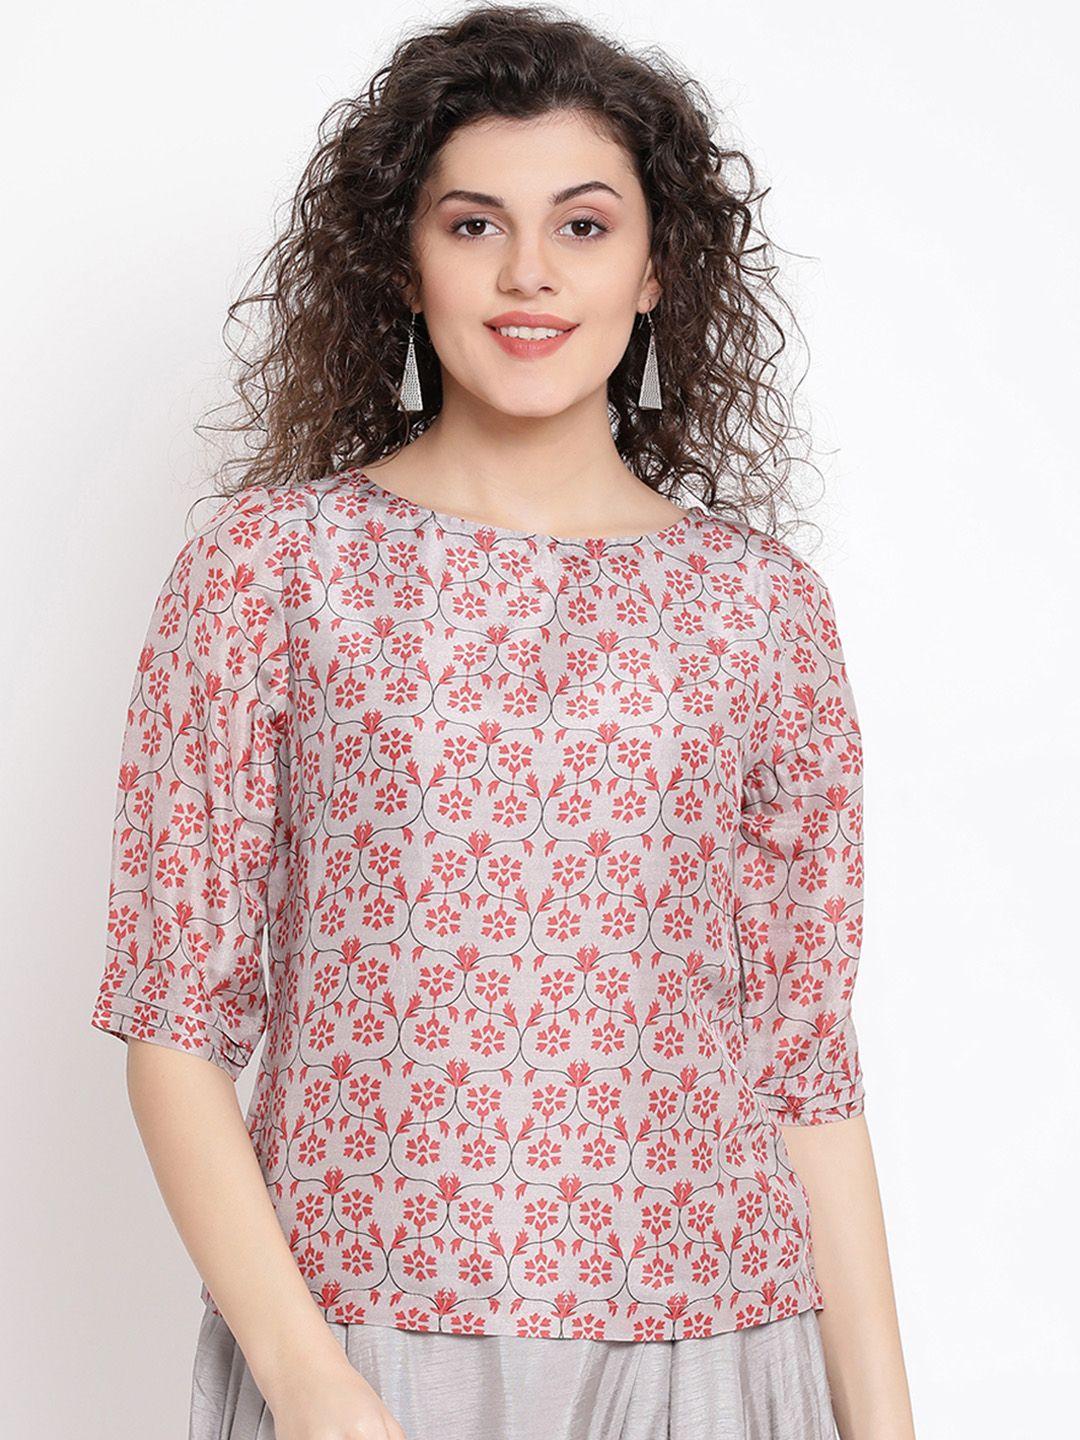 rooted women grey & red floral printed top